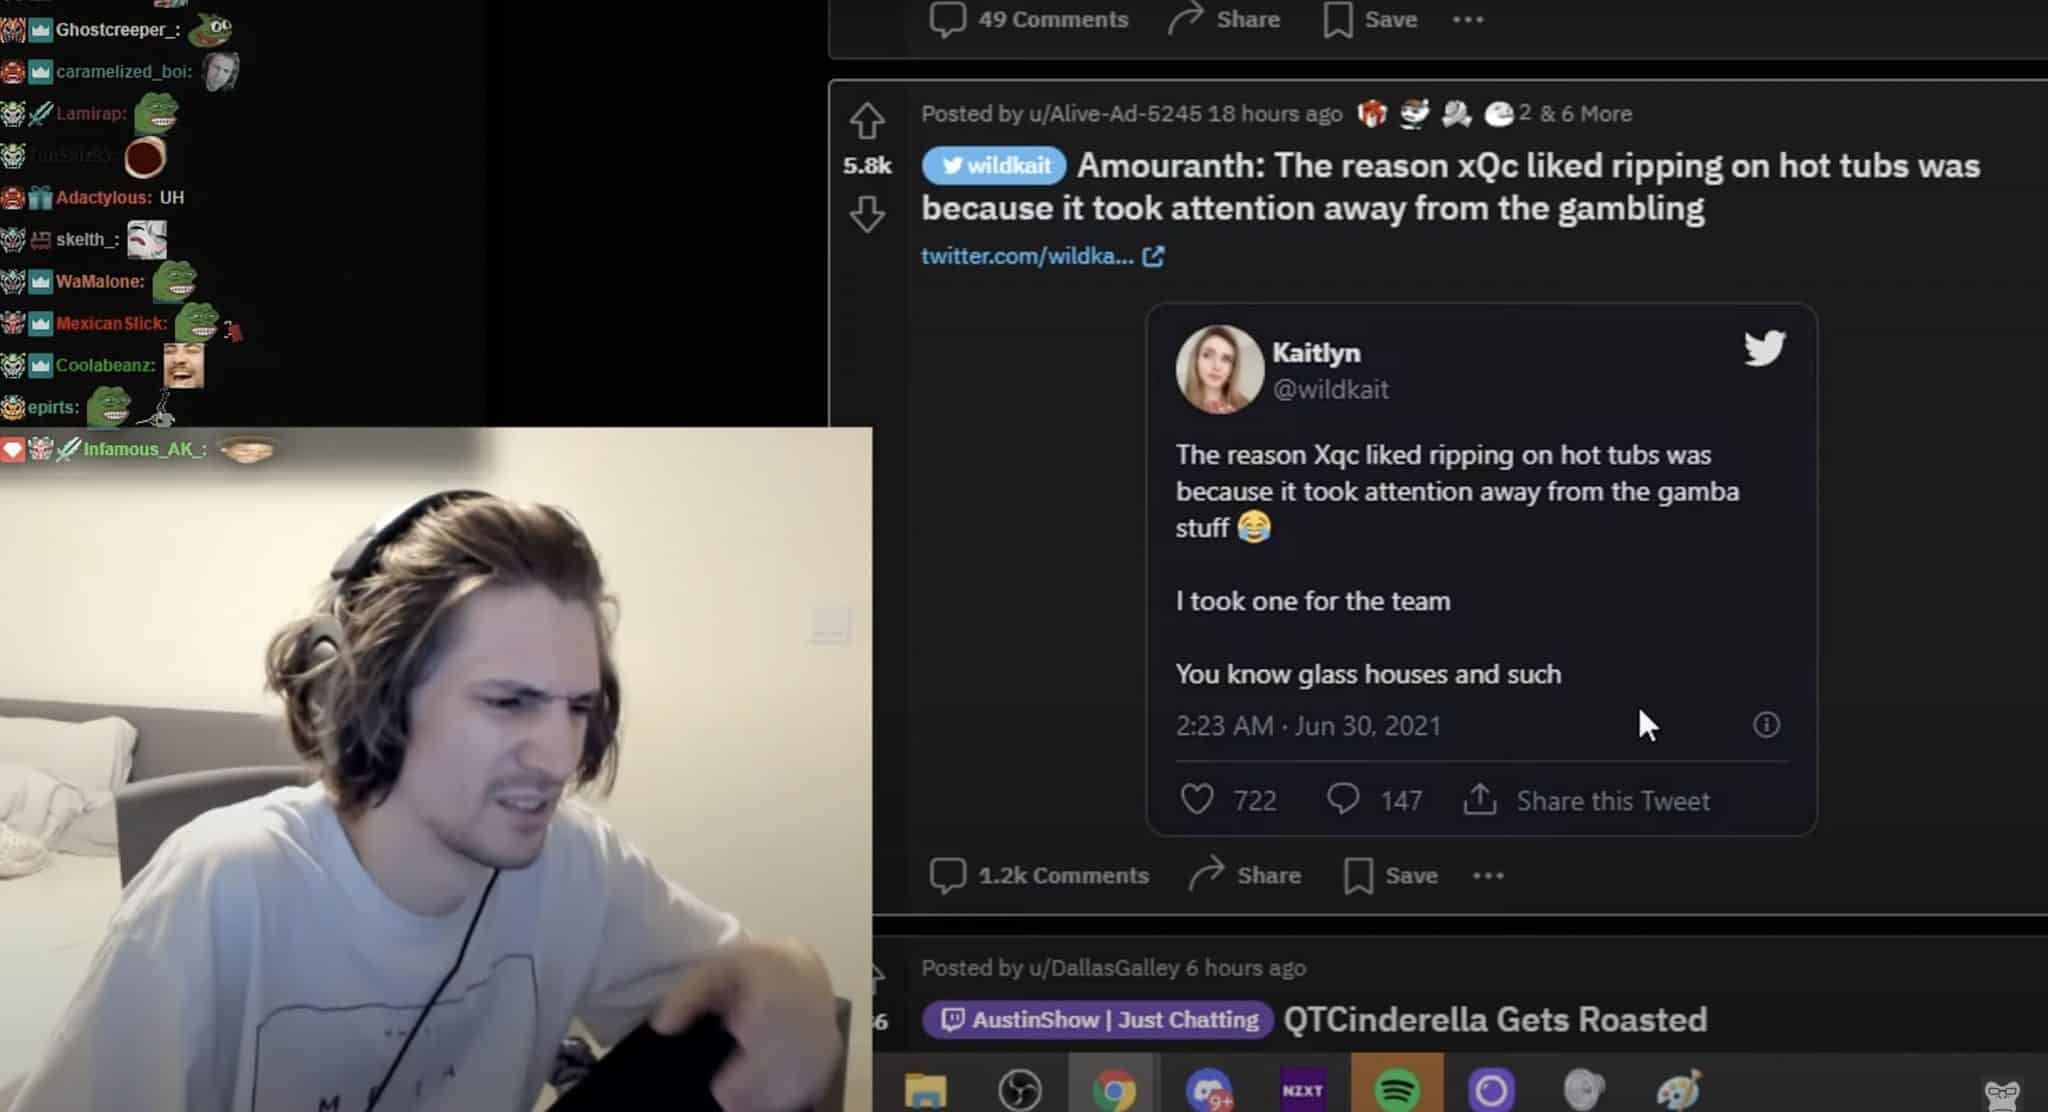 xQc reading Amouranth tweet during Twitch stream